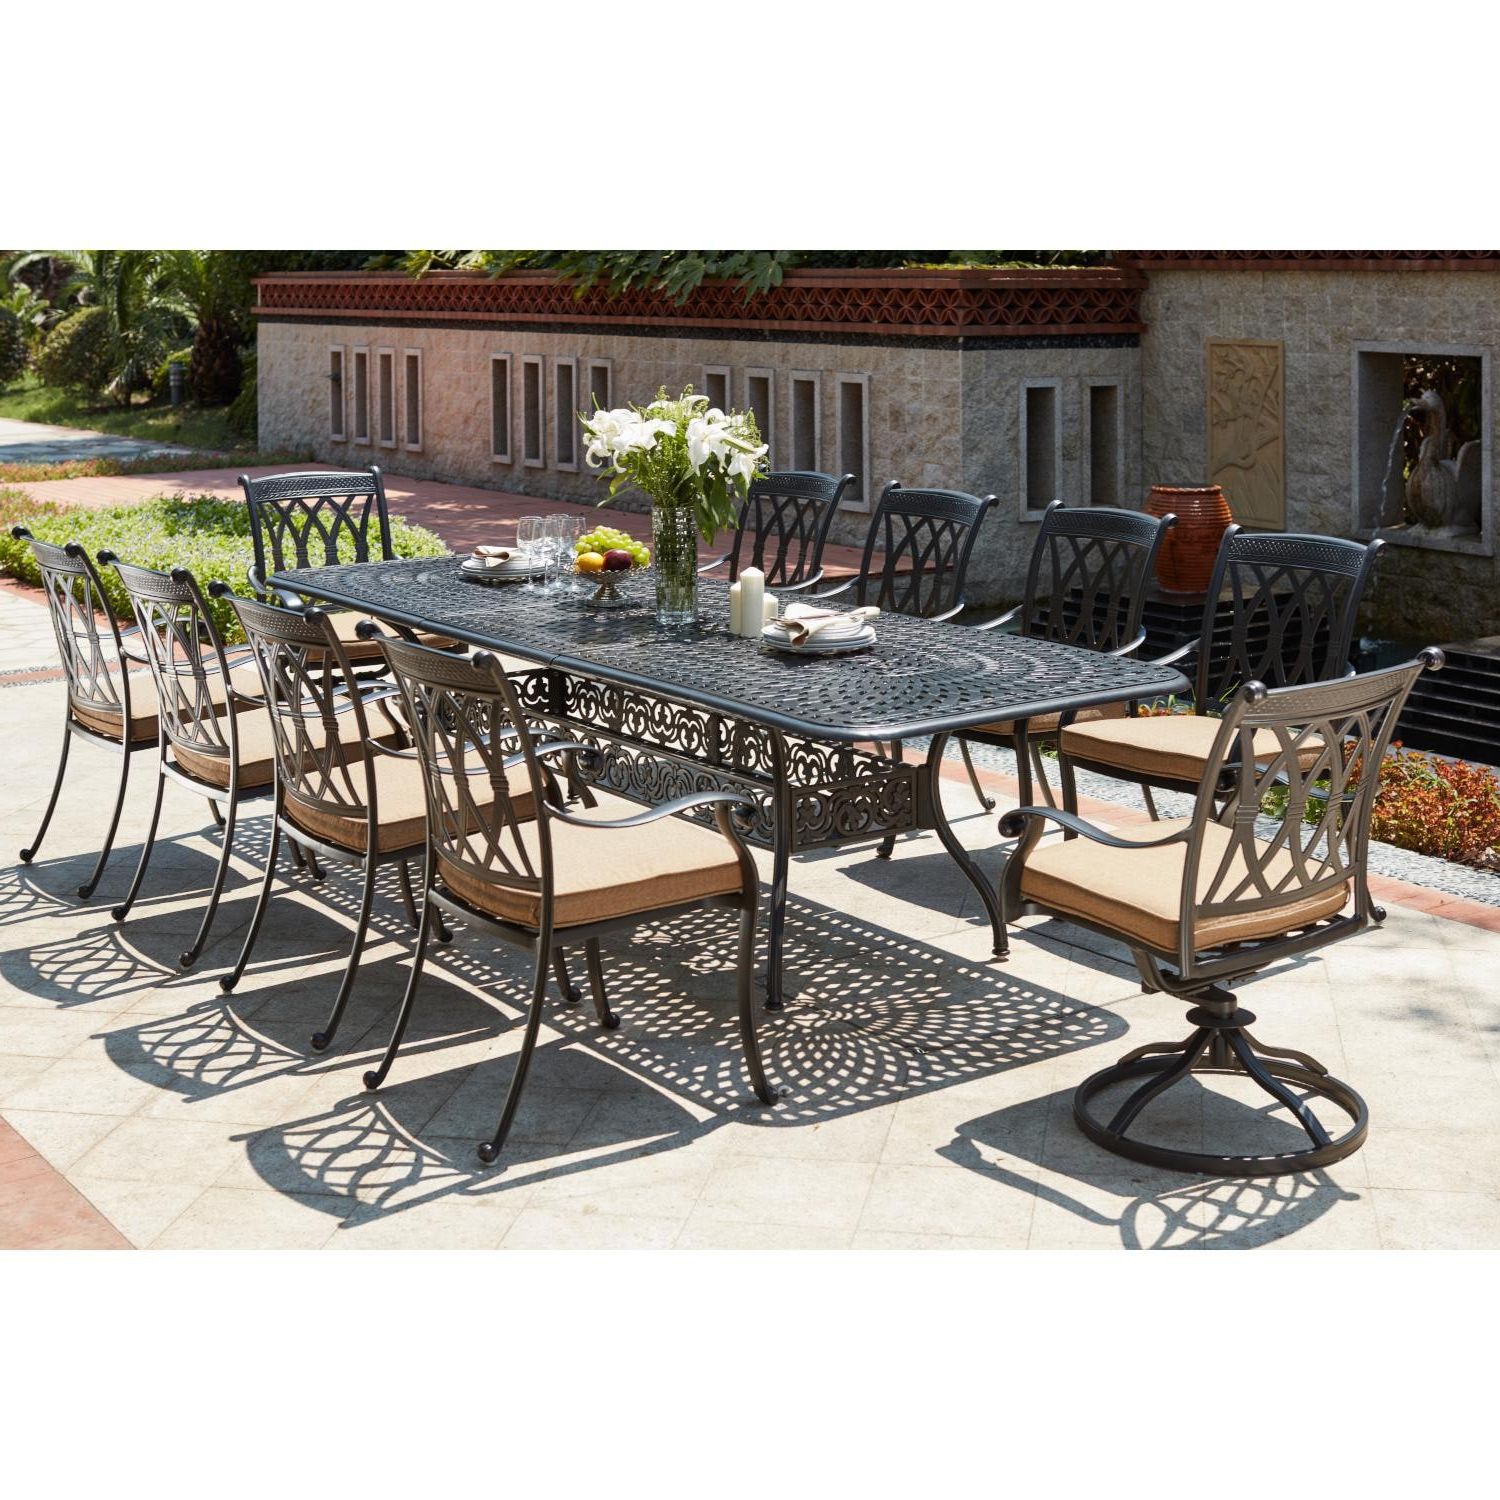 Capri 11 Piece Cast Aluminum Patio Dining Set W/ 92 X 42 Inch In Favorite 11 Piece Extendable Patio Dining Sets (View 9 of 15)